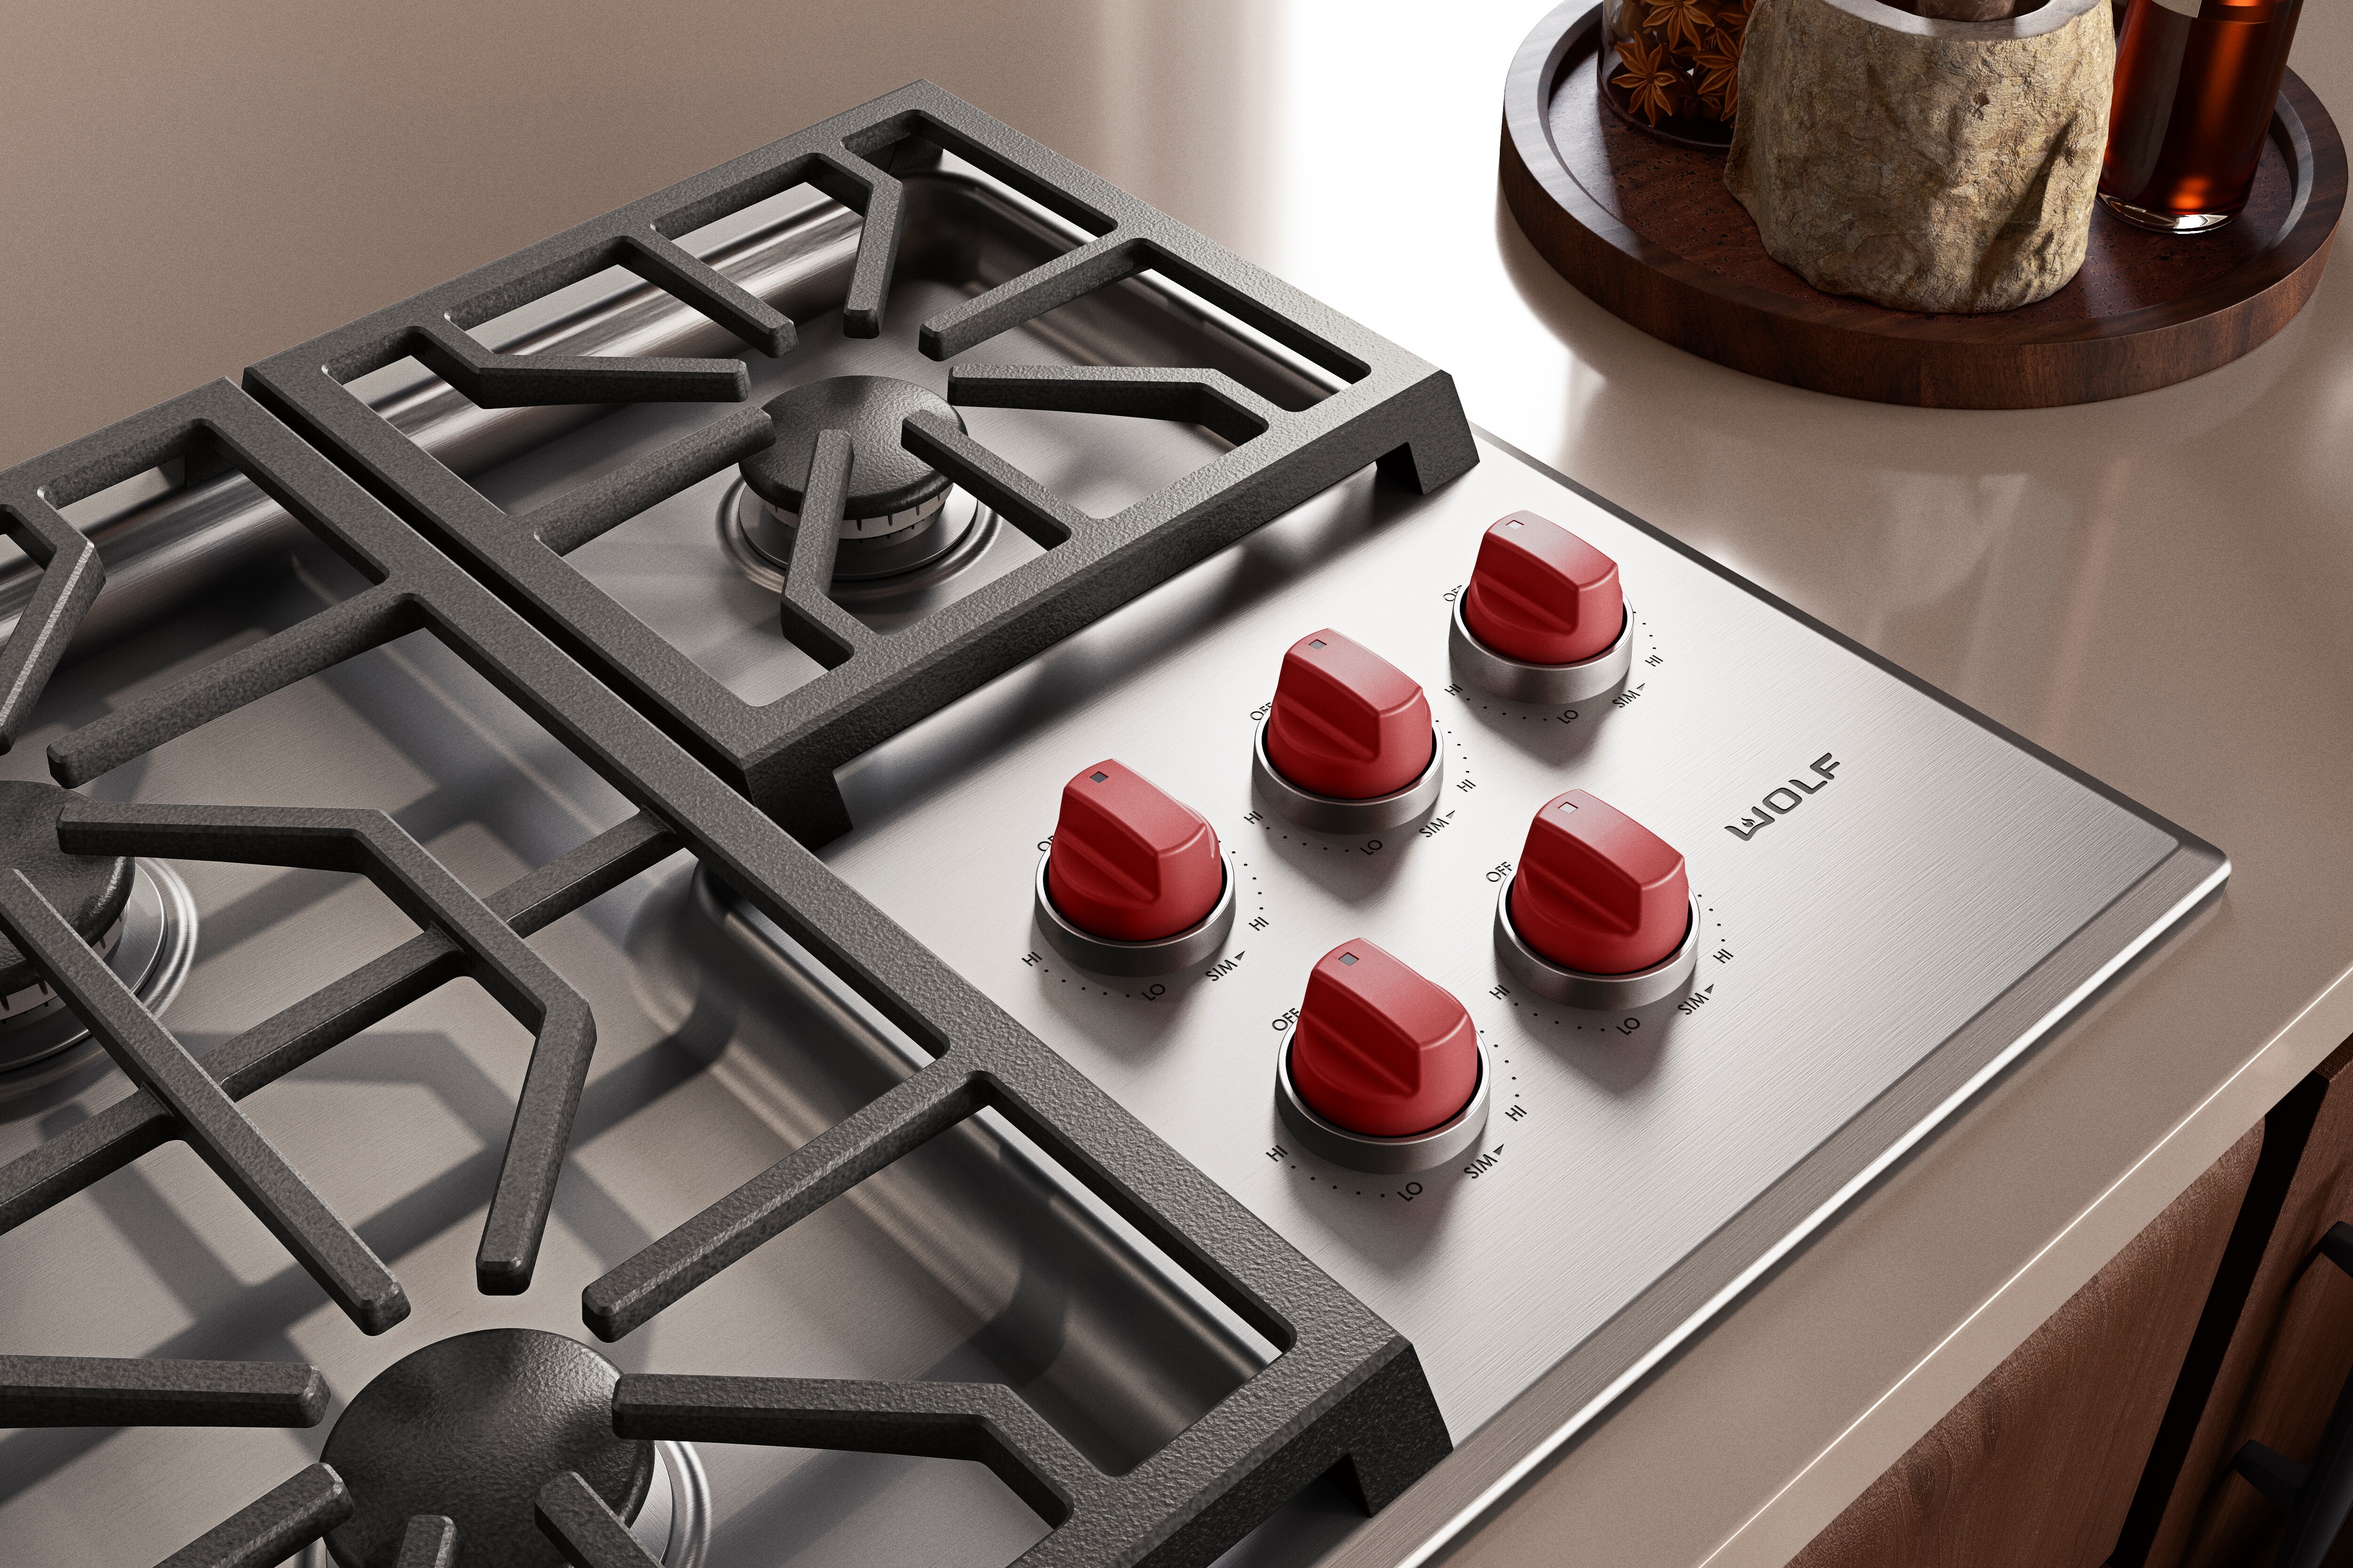 https://www.subzero-wolf.com/wolf/cooktops-and-rangetops/gas-stovetop/-/media/images/web20/pdp-color-options/knobs/22-subzero_knob-bezel-accents_cooktop-cg365ps_red.jpg